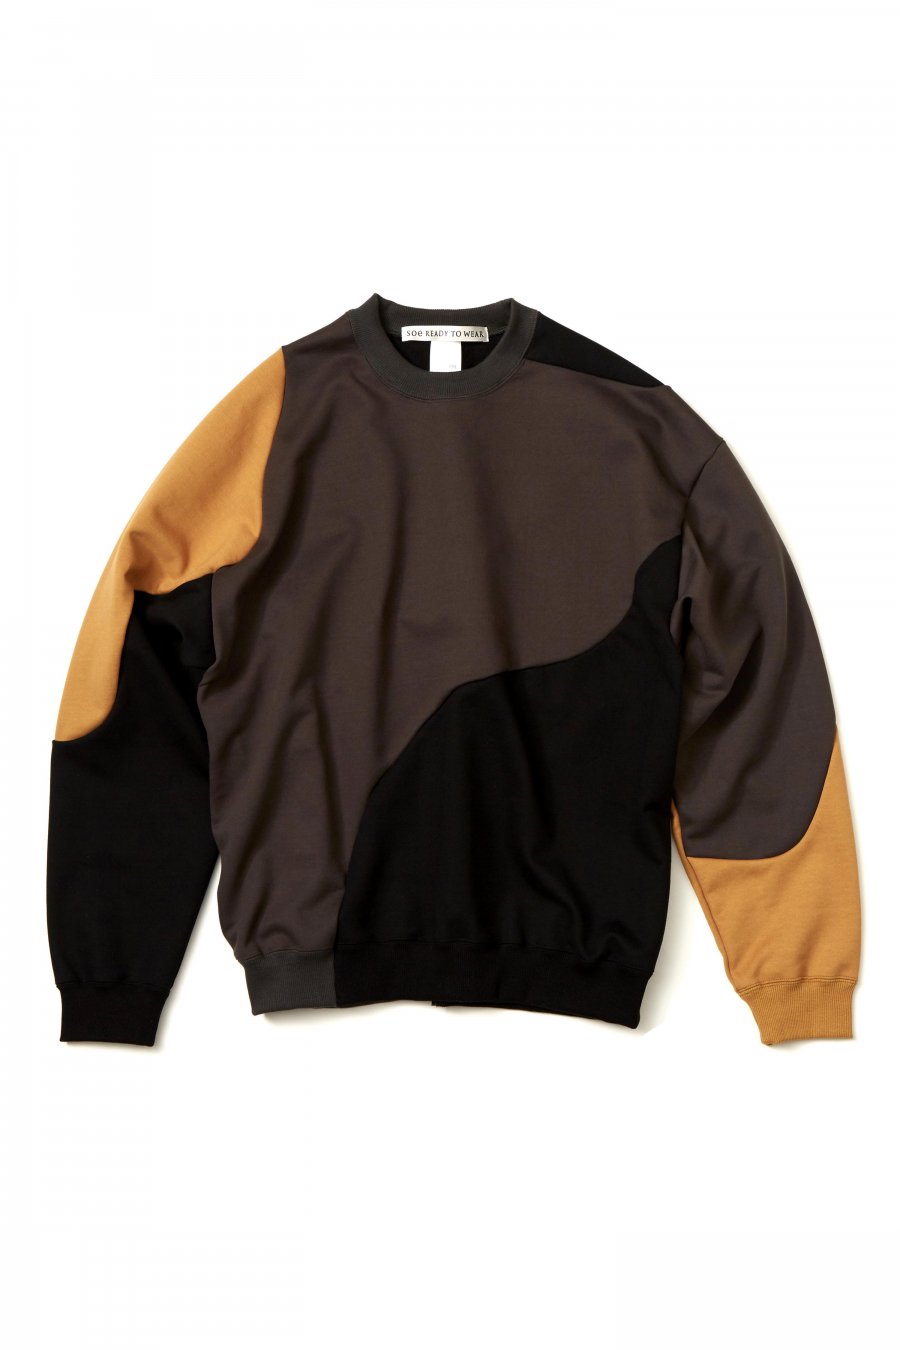 soe  3CC Sweat Shirt Collaborated With Pre_  (KHAKI/BLACK/BEIGE)<img class='new_mark_img2' src='https://img.shop-pro.jp/img/new/icons15.gif' style='border:none;display:inline;margin:0px;padding:0px;width:auto;' />